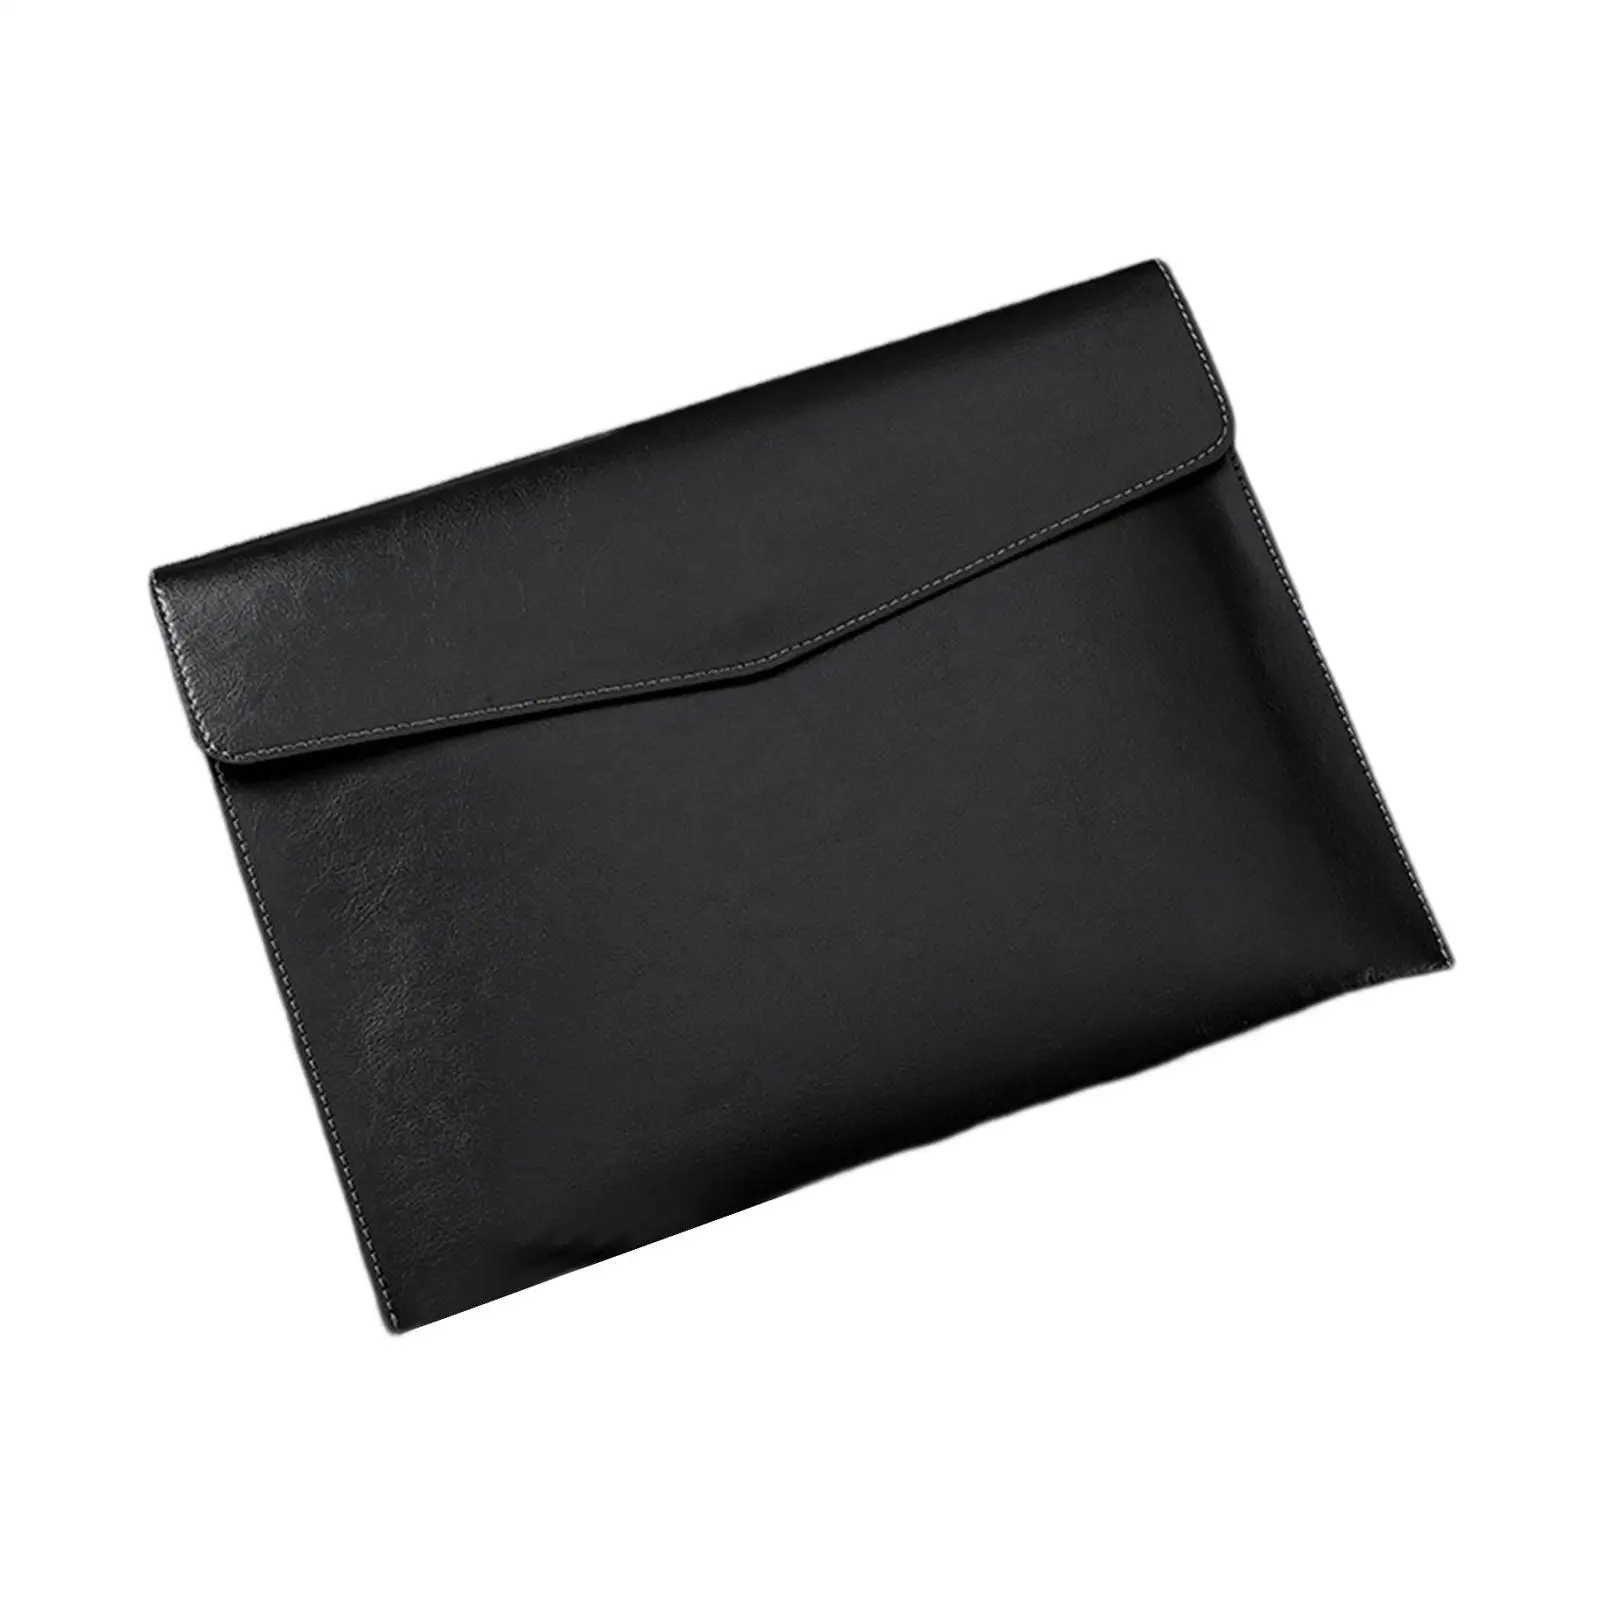 PU Leather Folder Waterproof with Pen Slots Multifunctional Envelope Folder Case for Company Office Teaching Commercial Business